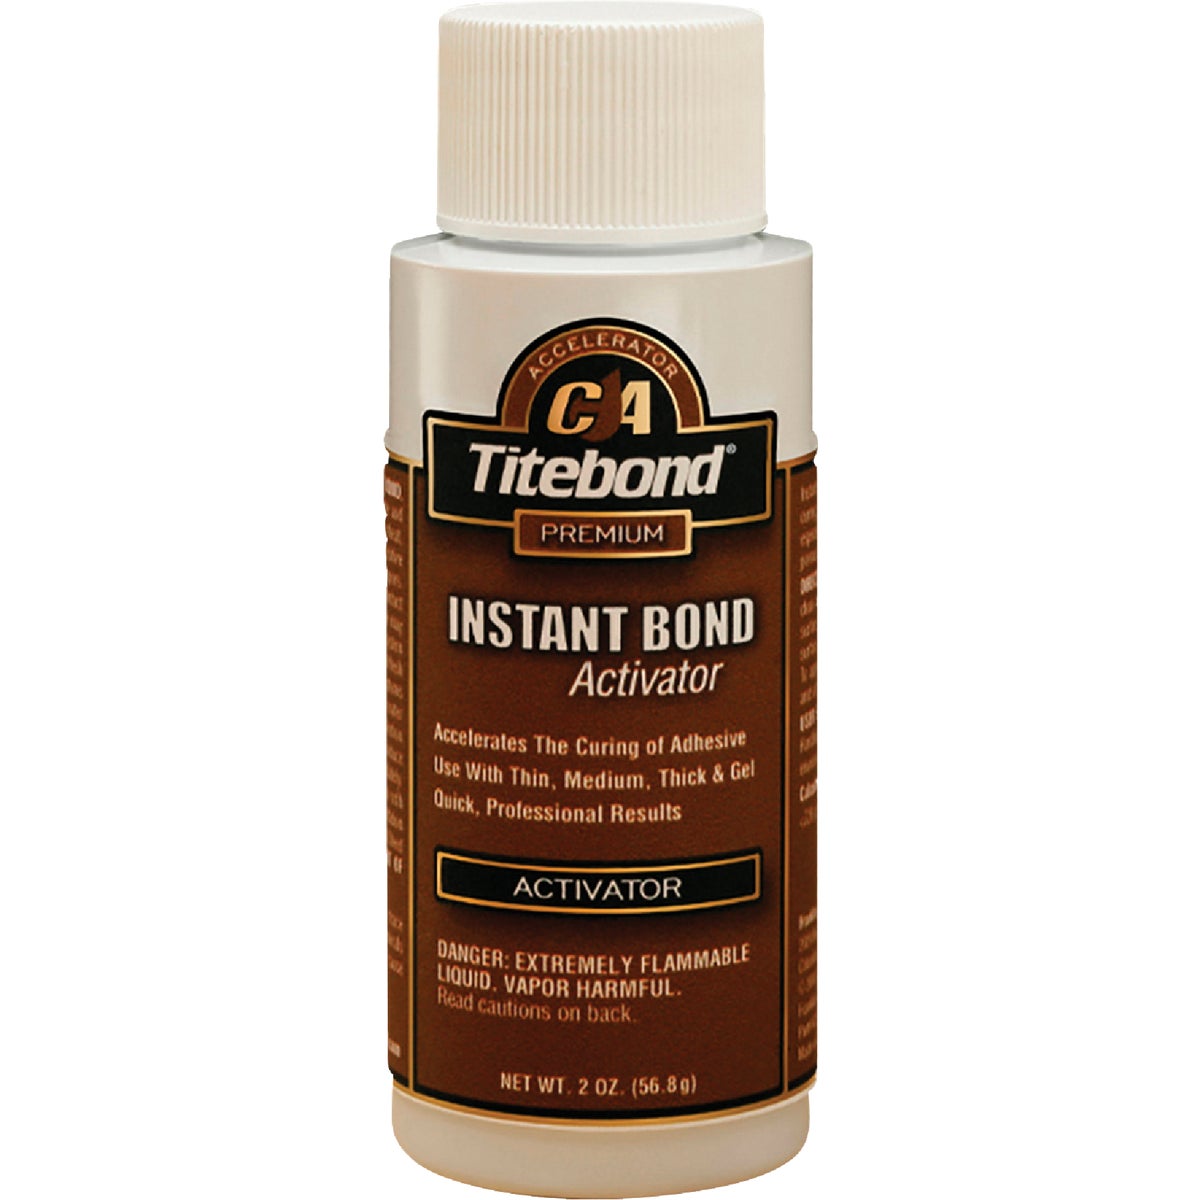 Item 349705, Accelerates the curing time for Titebond instant bond products.